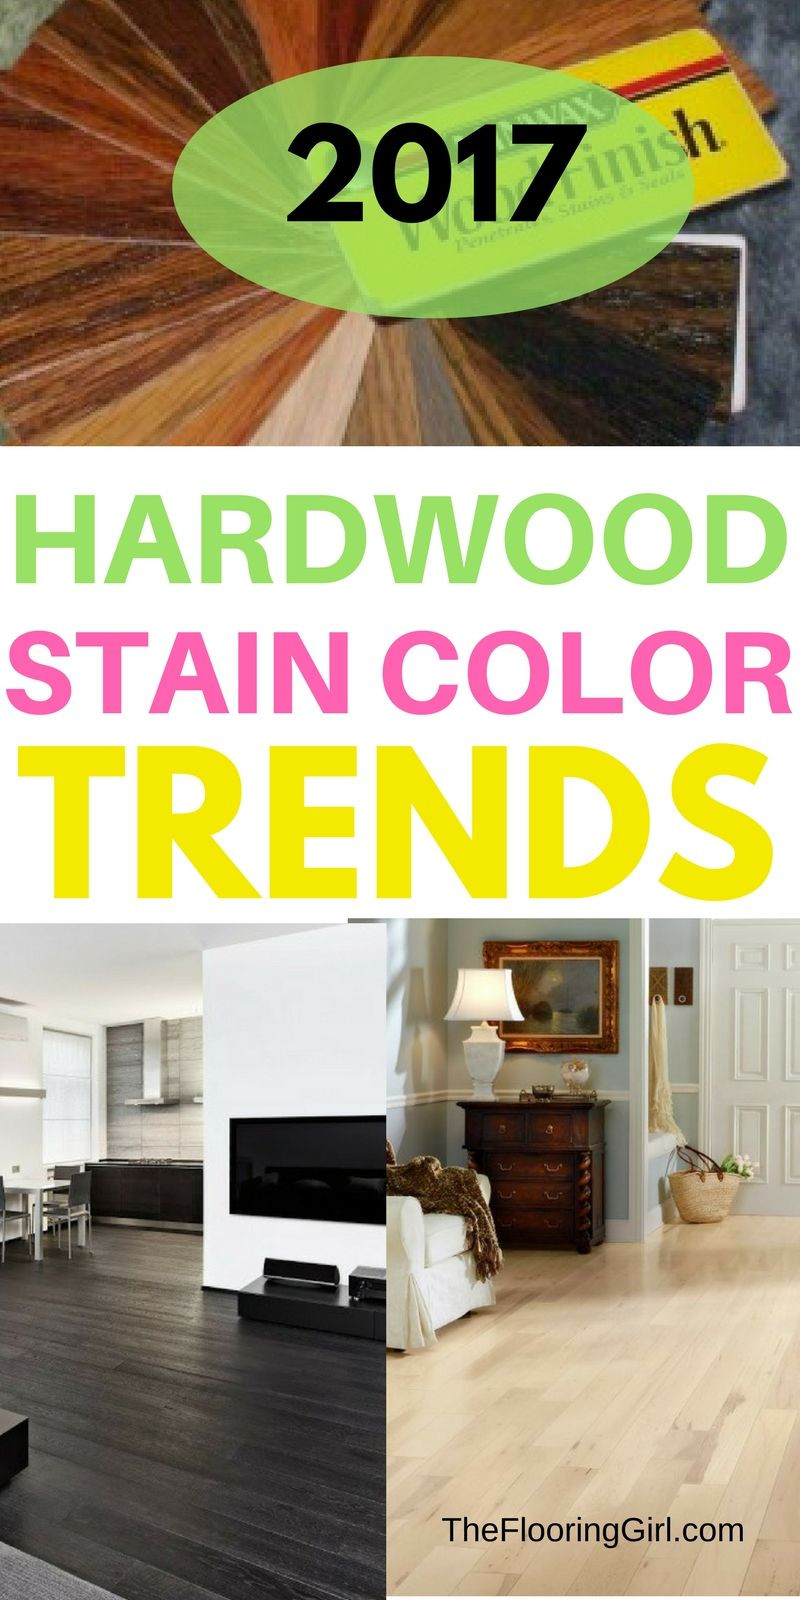 20 Fantastic Hickory Hardwood Floor Vents 2024 free download hickory hardwood floor vents of hardwood flooring stain color trends 2018 more from the flooring within hardwood flooring stain color trends for 2017 hardwood colors that are in style theflo